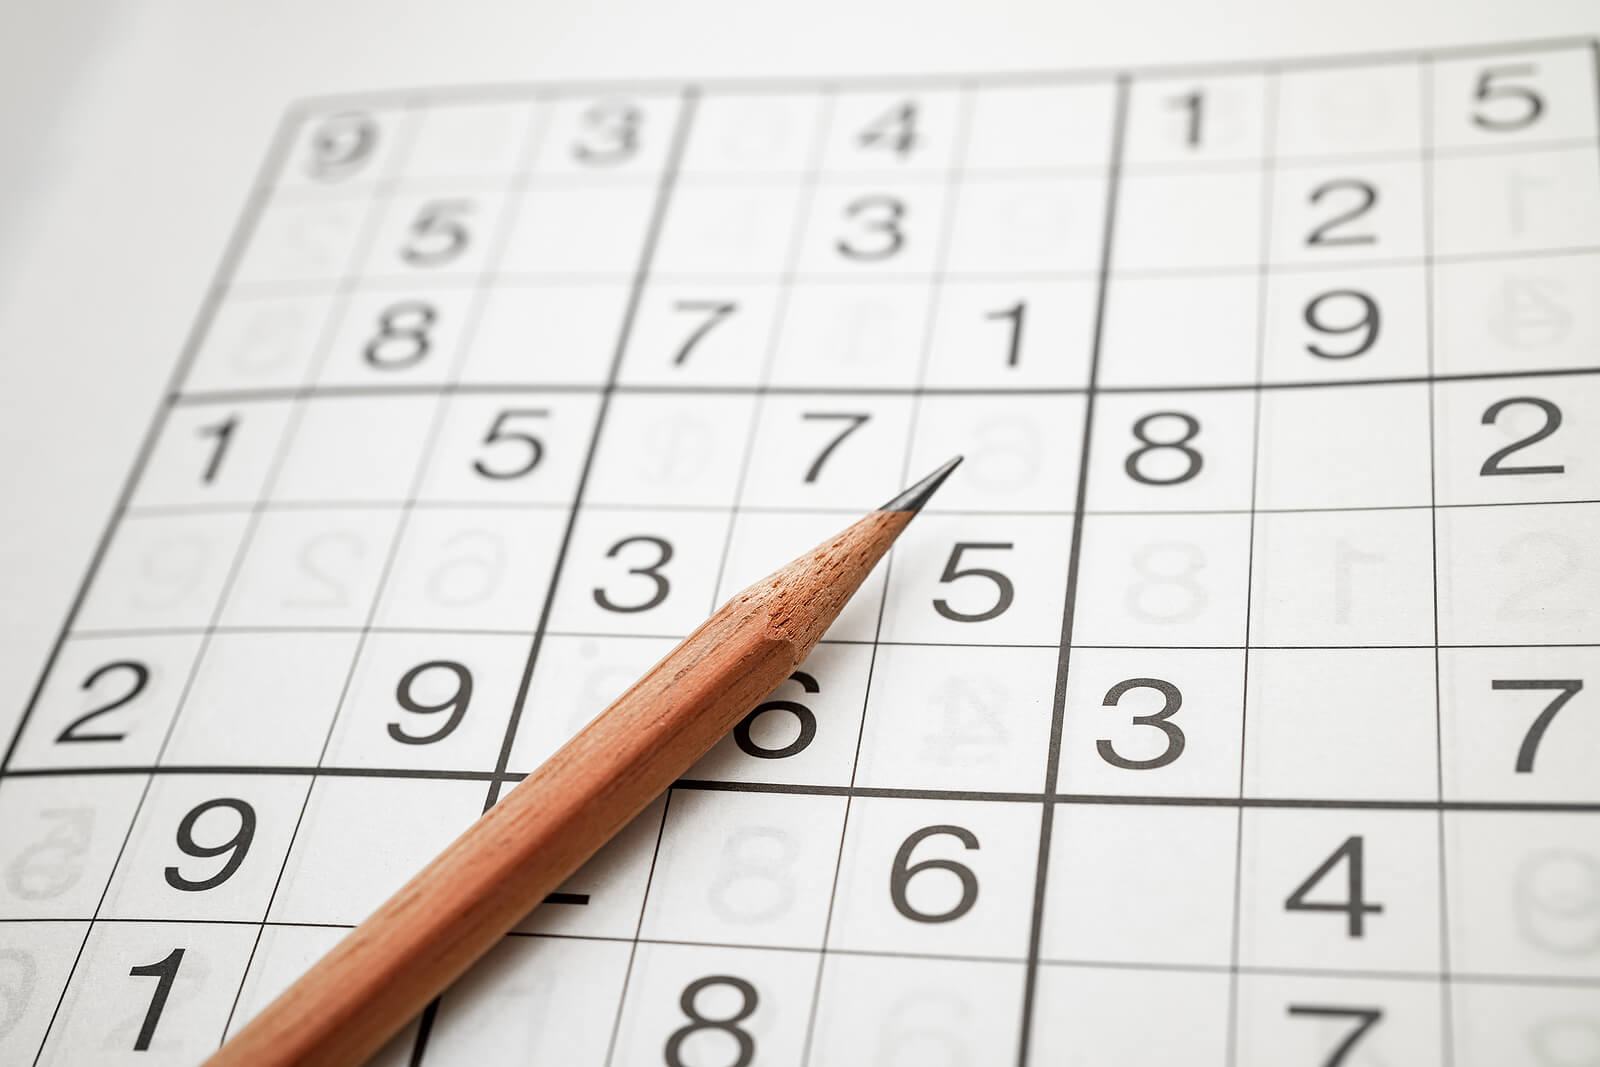 5 Sudoku Tips for Absolute Beginners